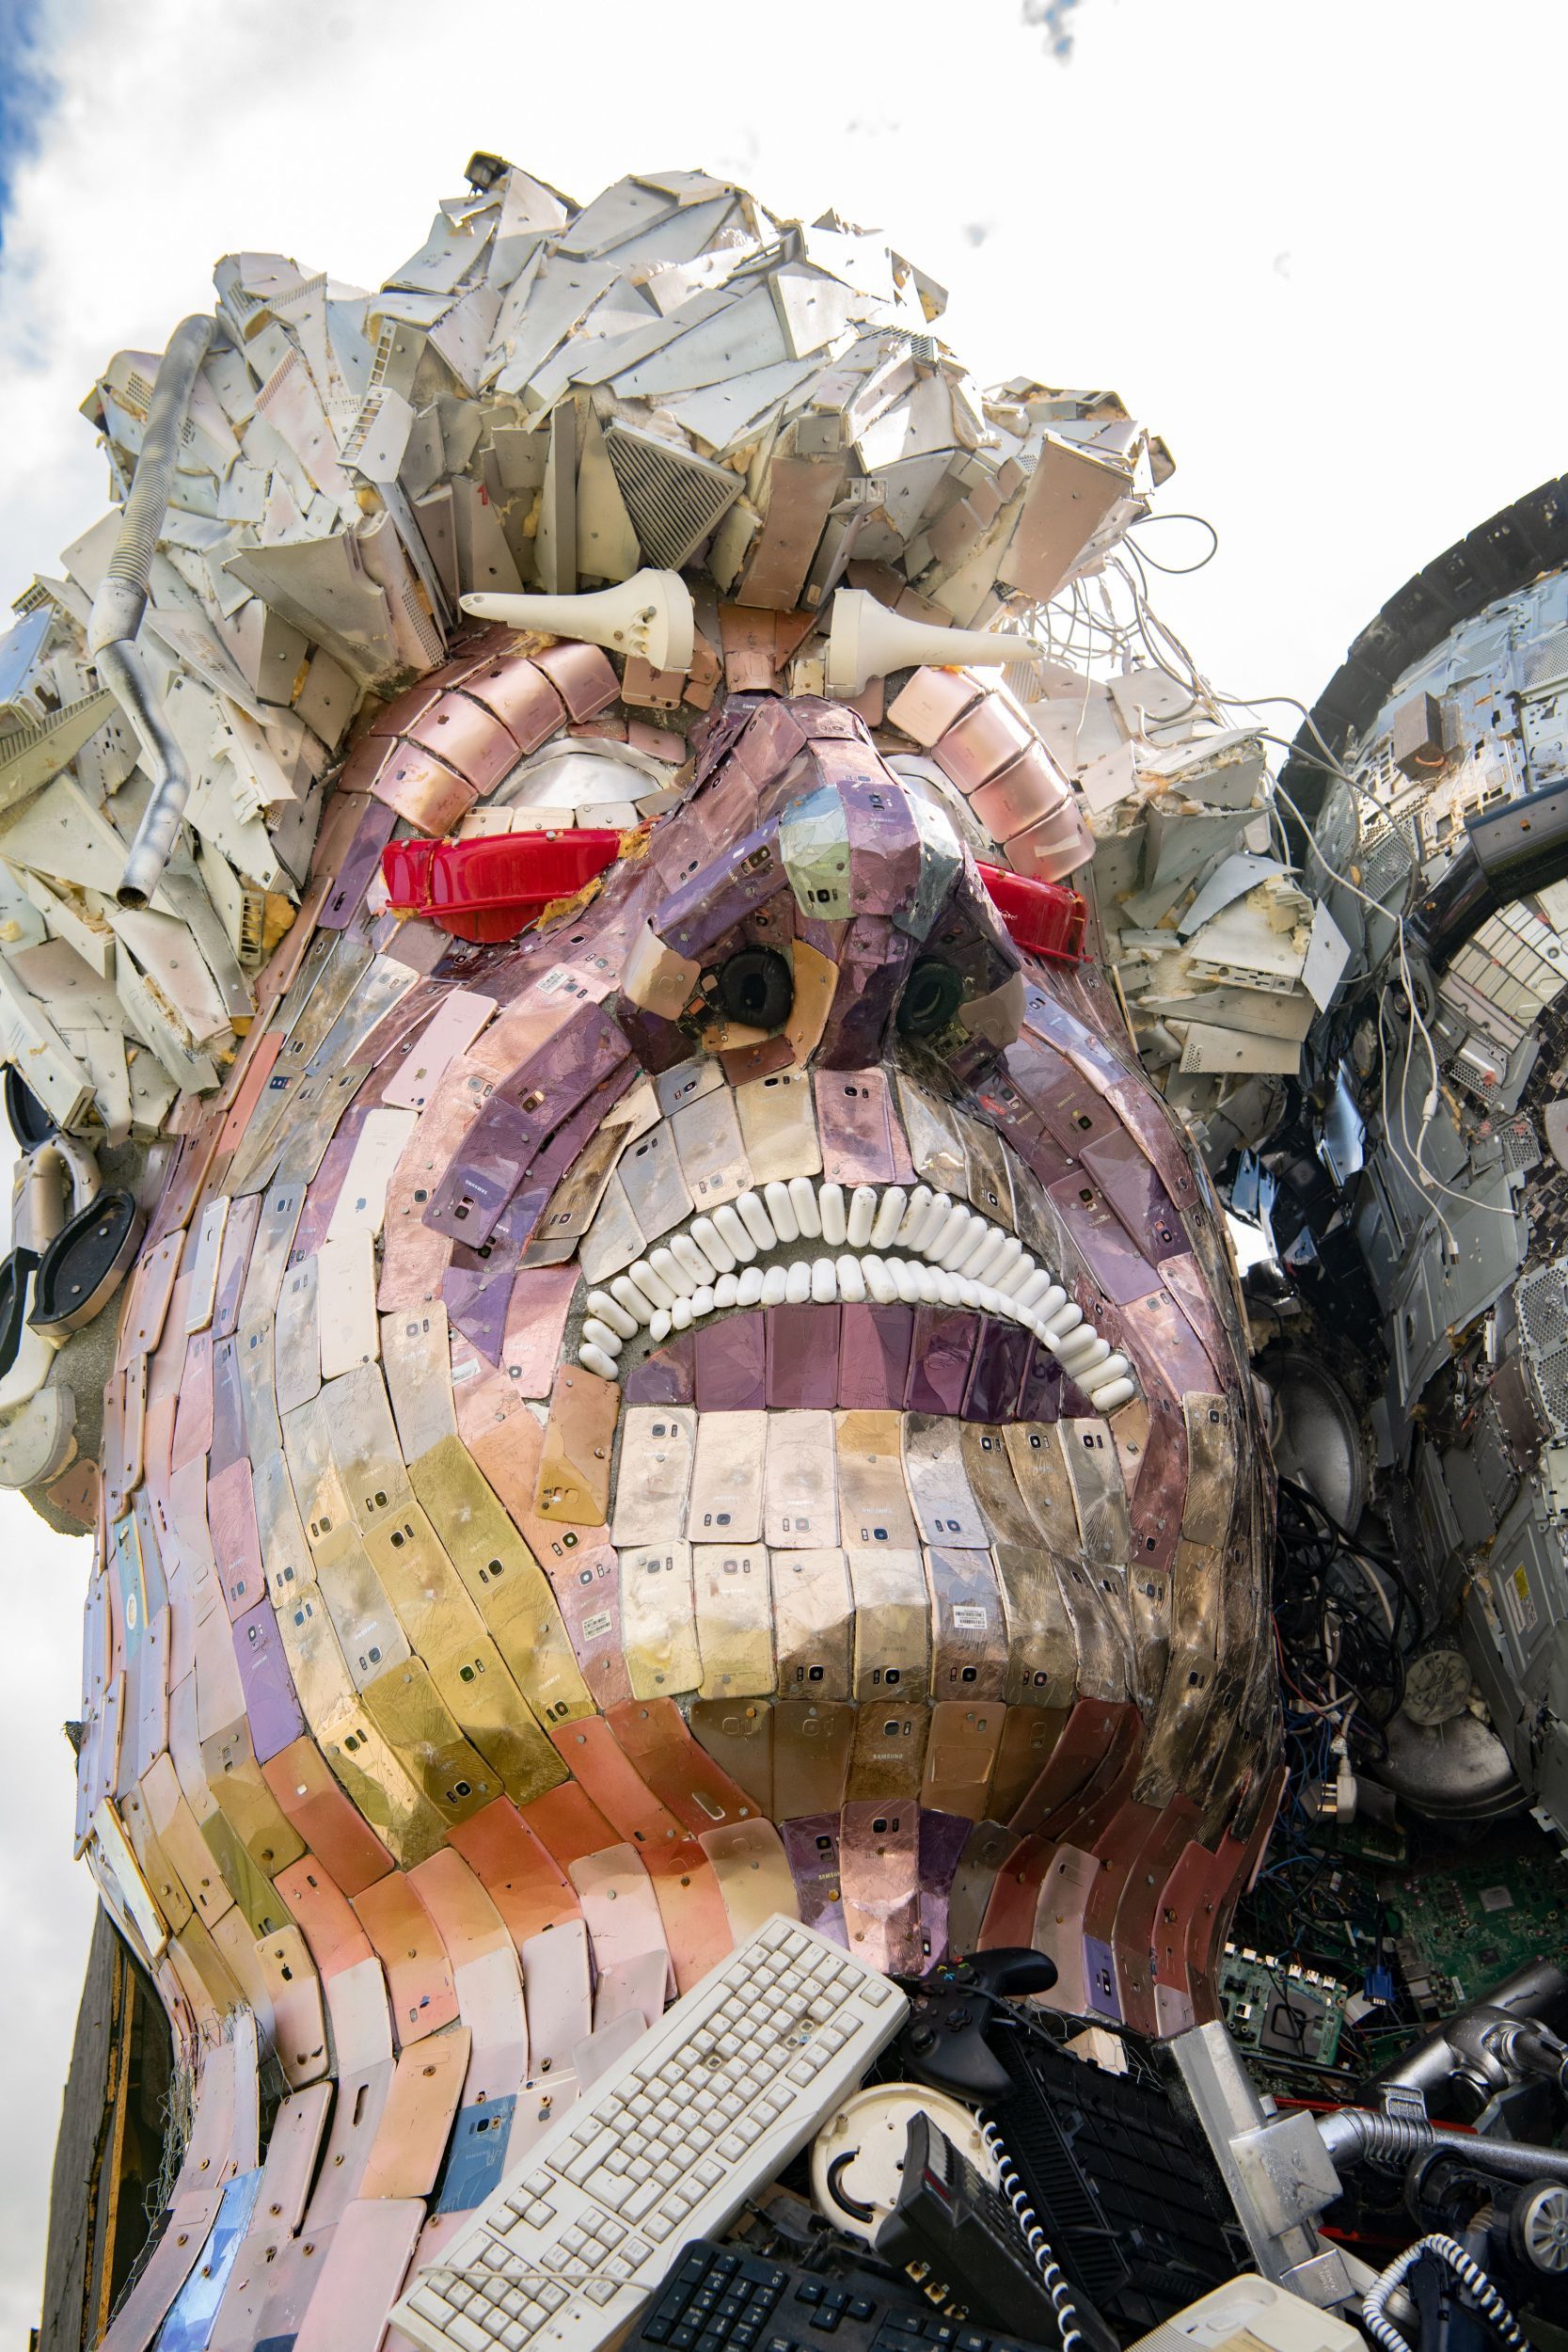 Boris Johnson made from waste electronics. Picture: Kathy White